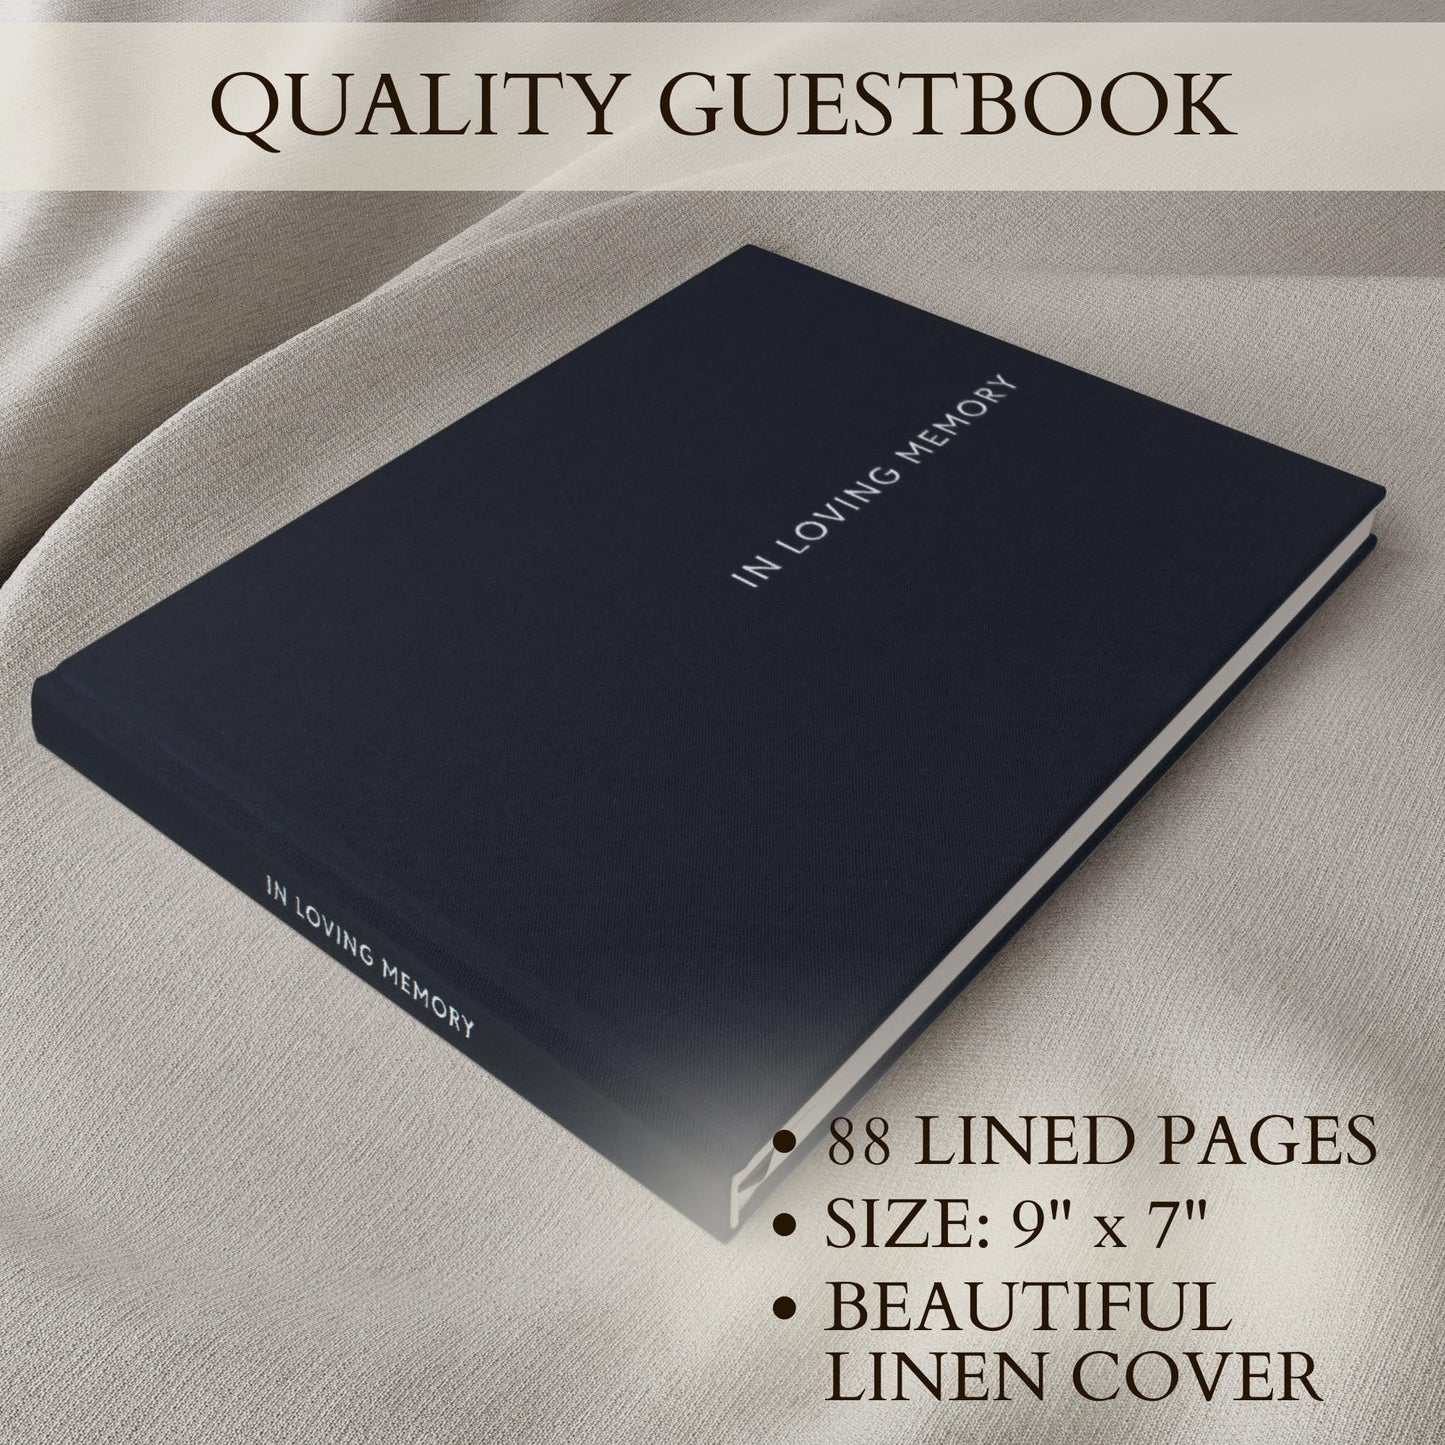 ZICOTO Beautiful Linen Funeral Guest Book for The Celebration of Life - The Perfect in Loving Memory Book with Ample Space to Sign in for Guests - Premium Craftsmanship for Honoring Loved Ones